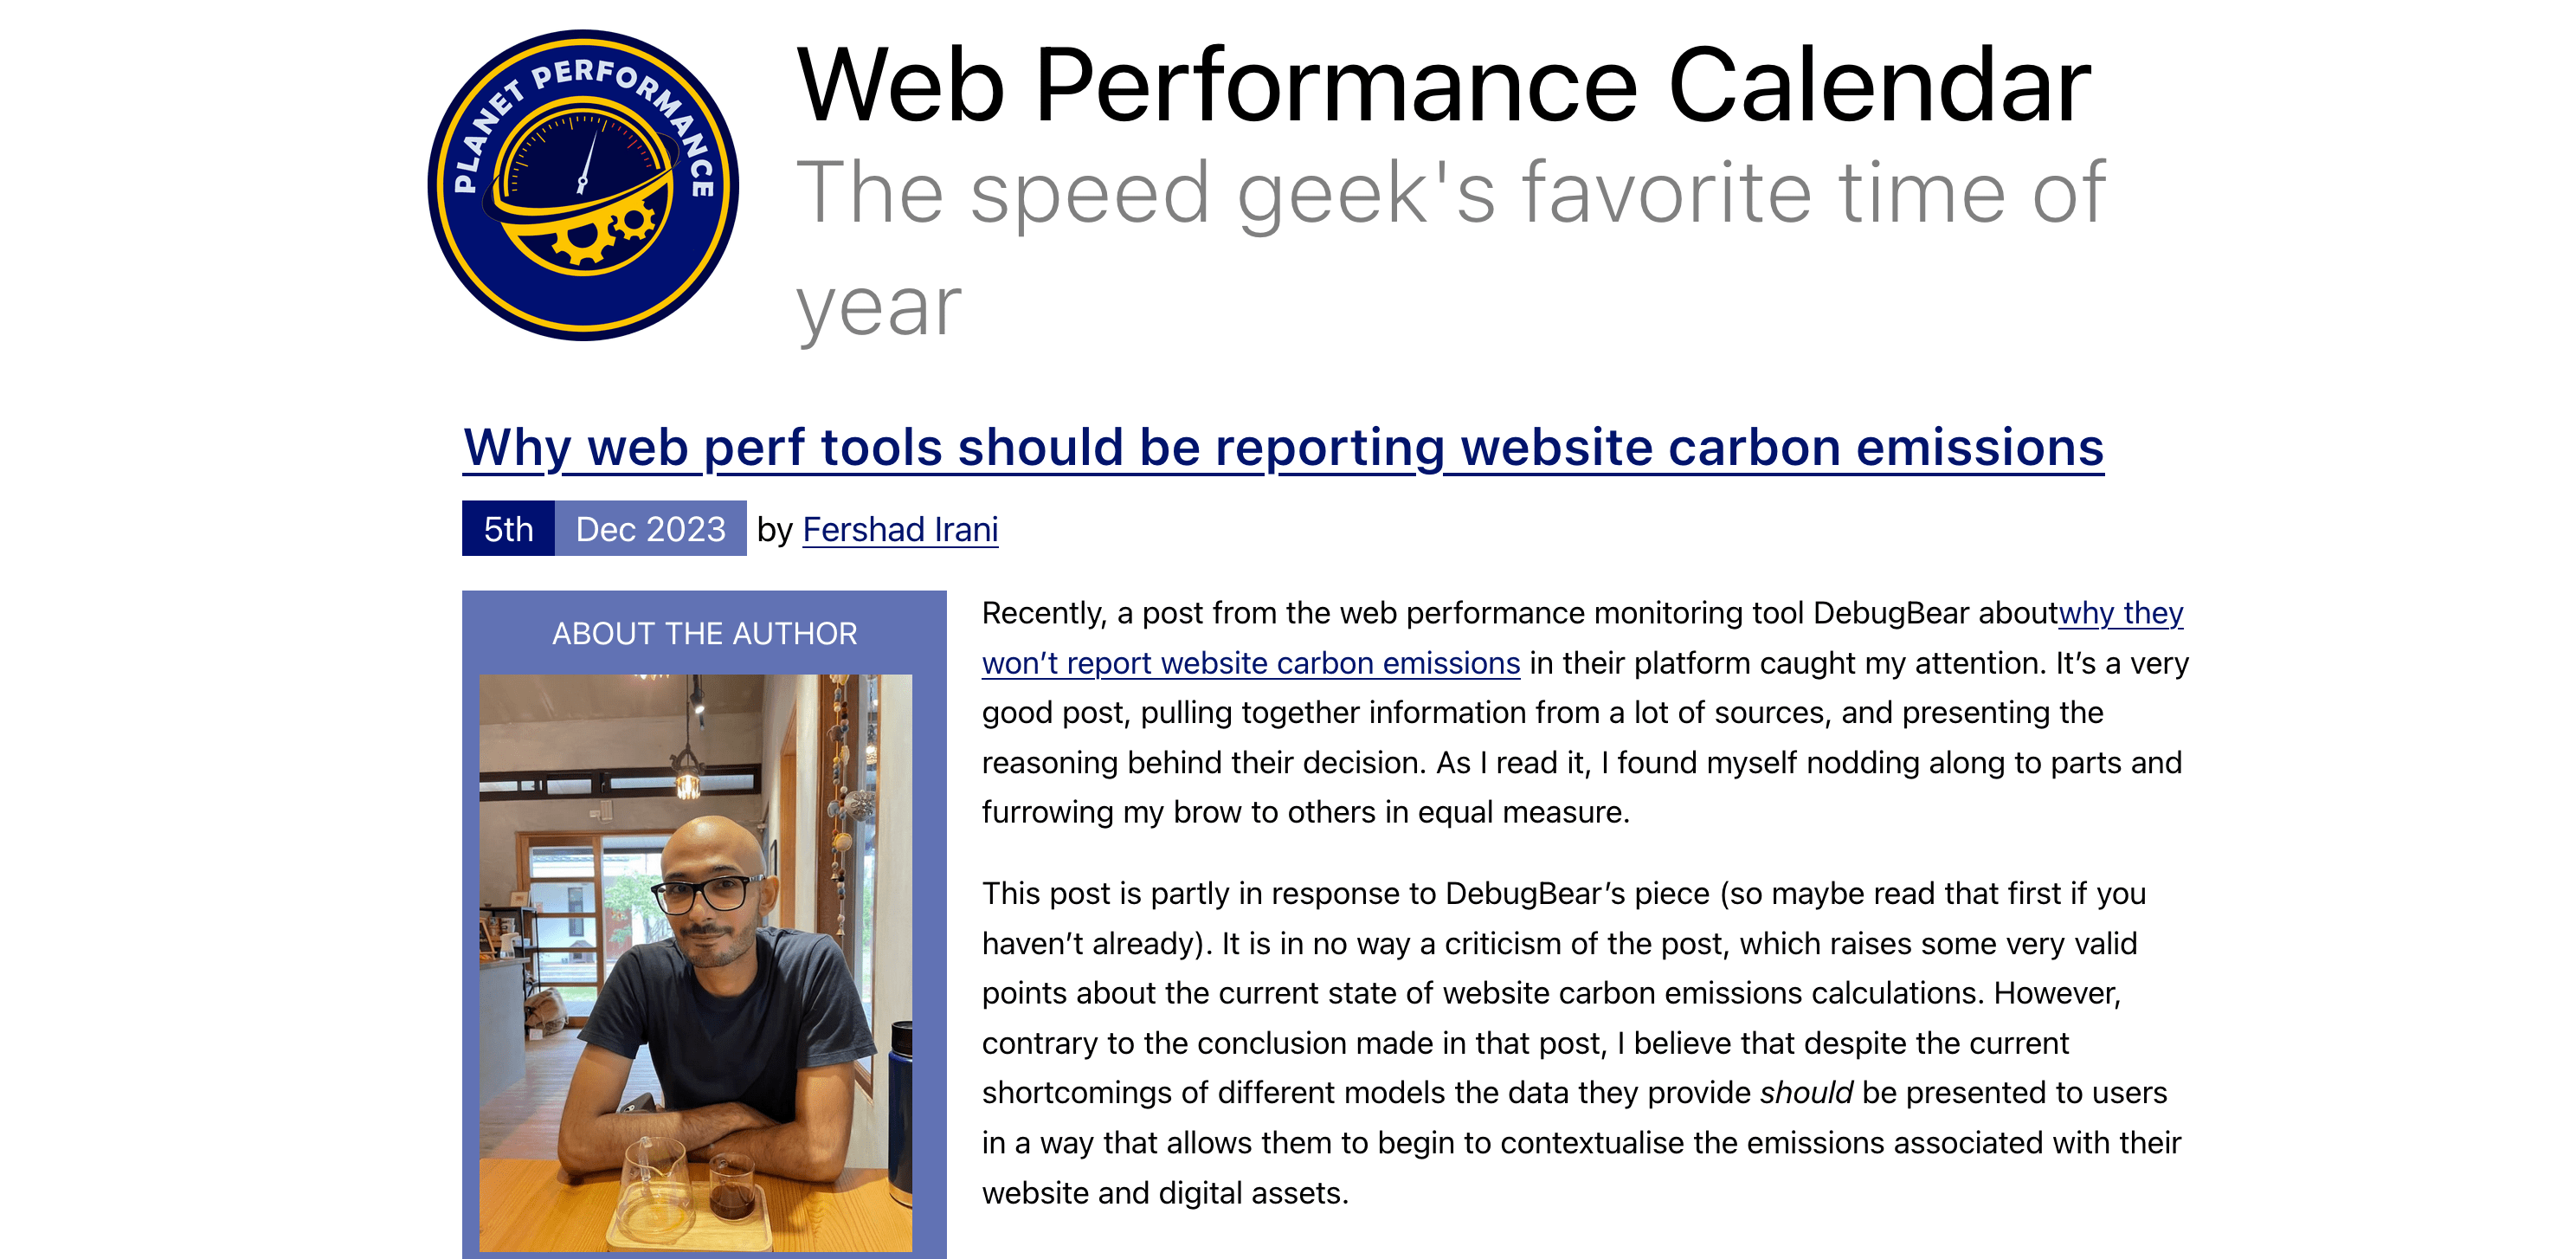 Why web perf tools should be reporting website carbon emissions